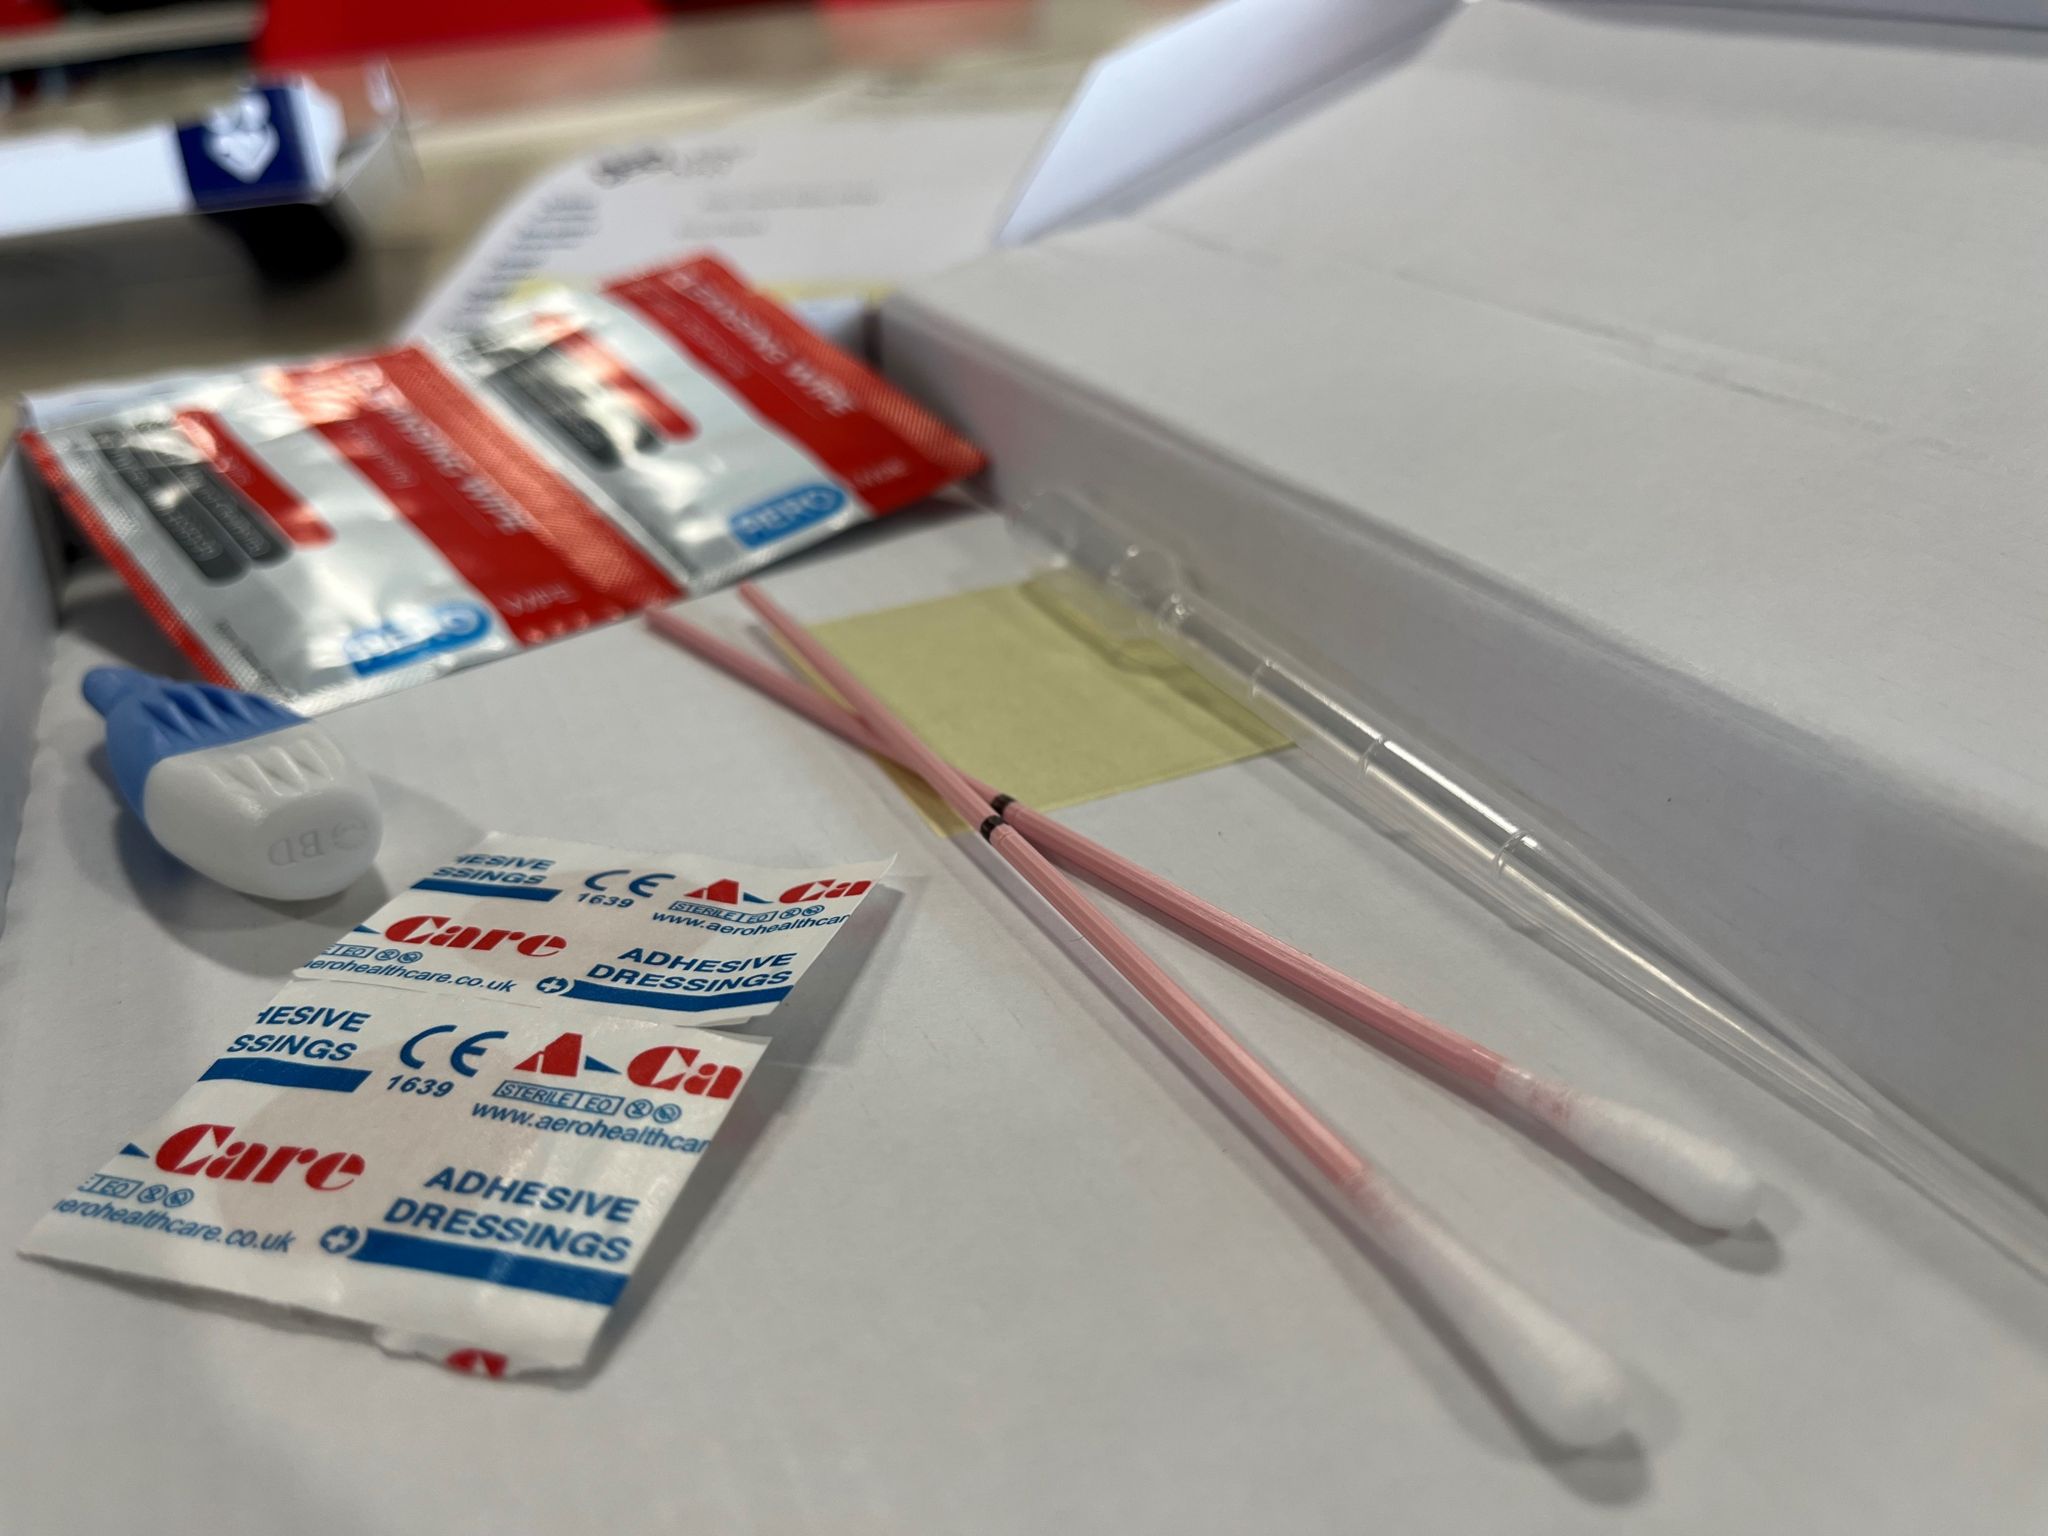 Swabs and test kits